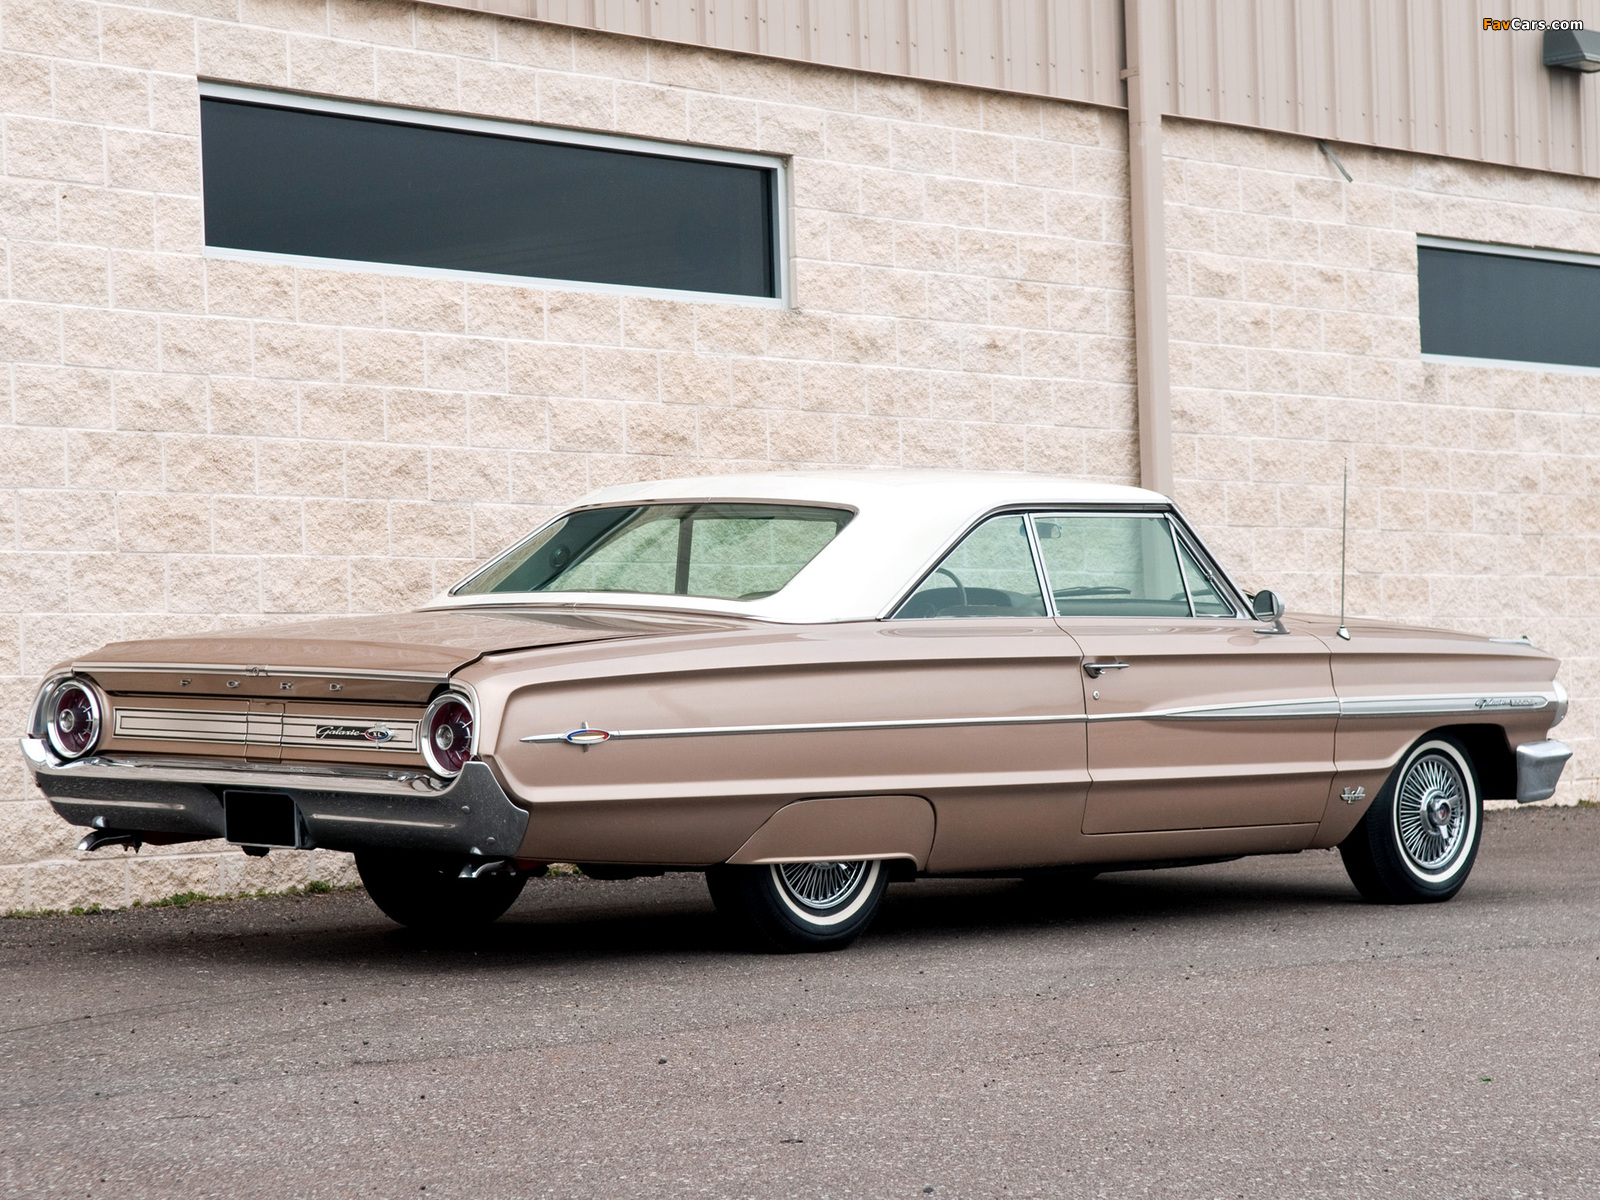 Images of Ford Galaxie 500 XL Hardtop Coupe 1964 (1600 x 1200)